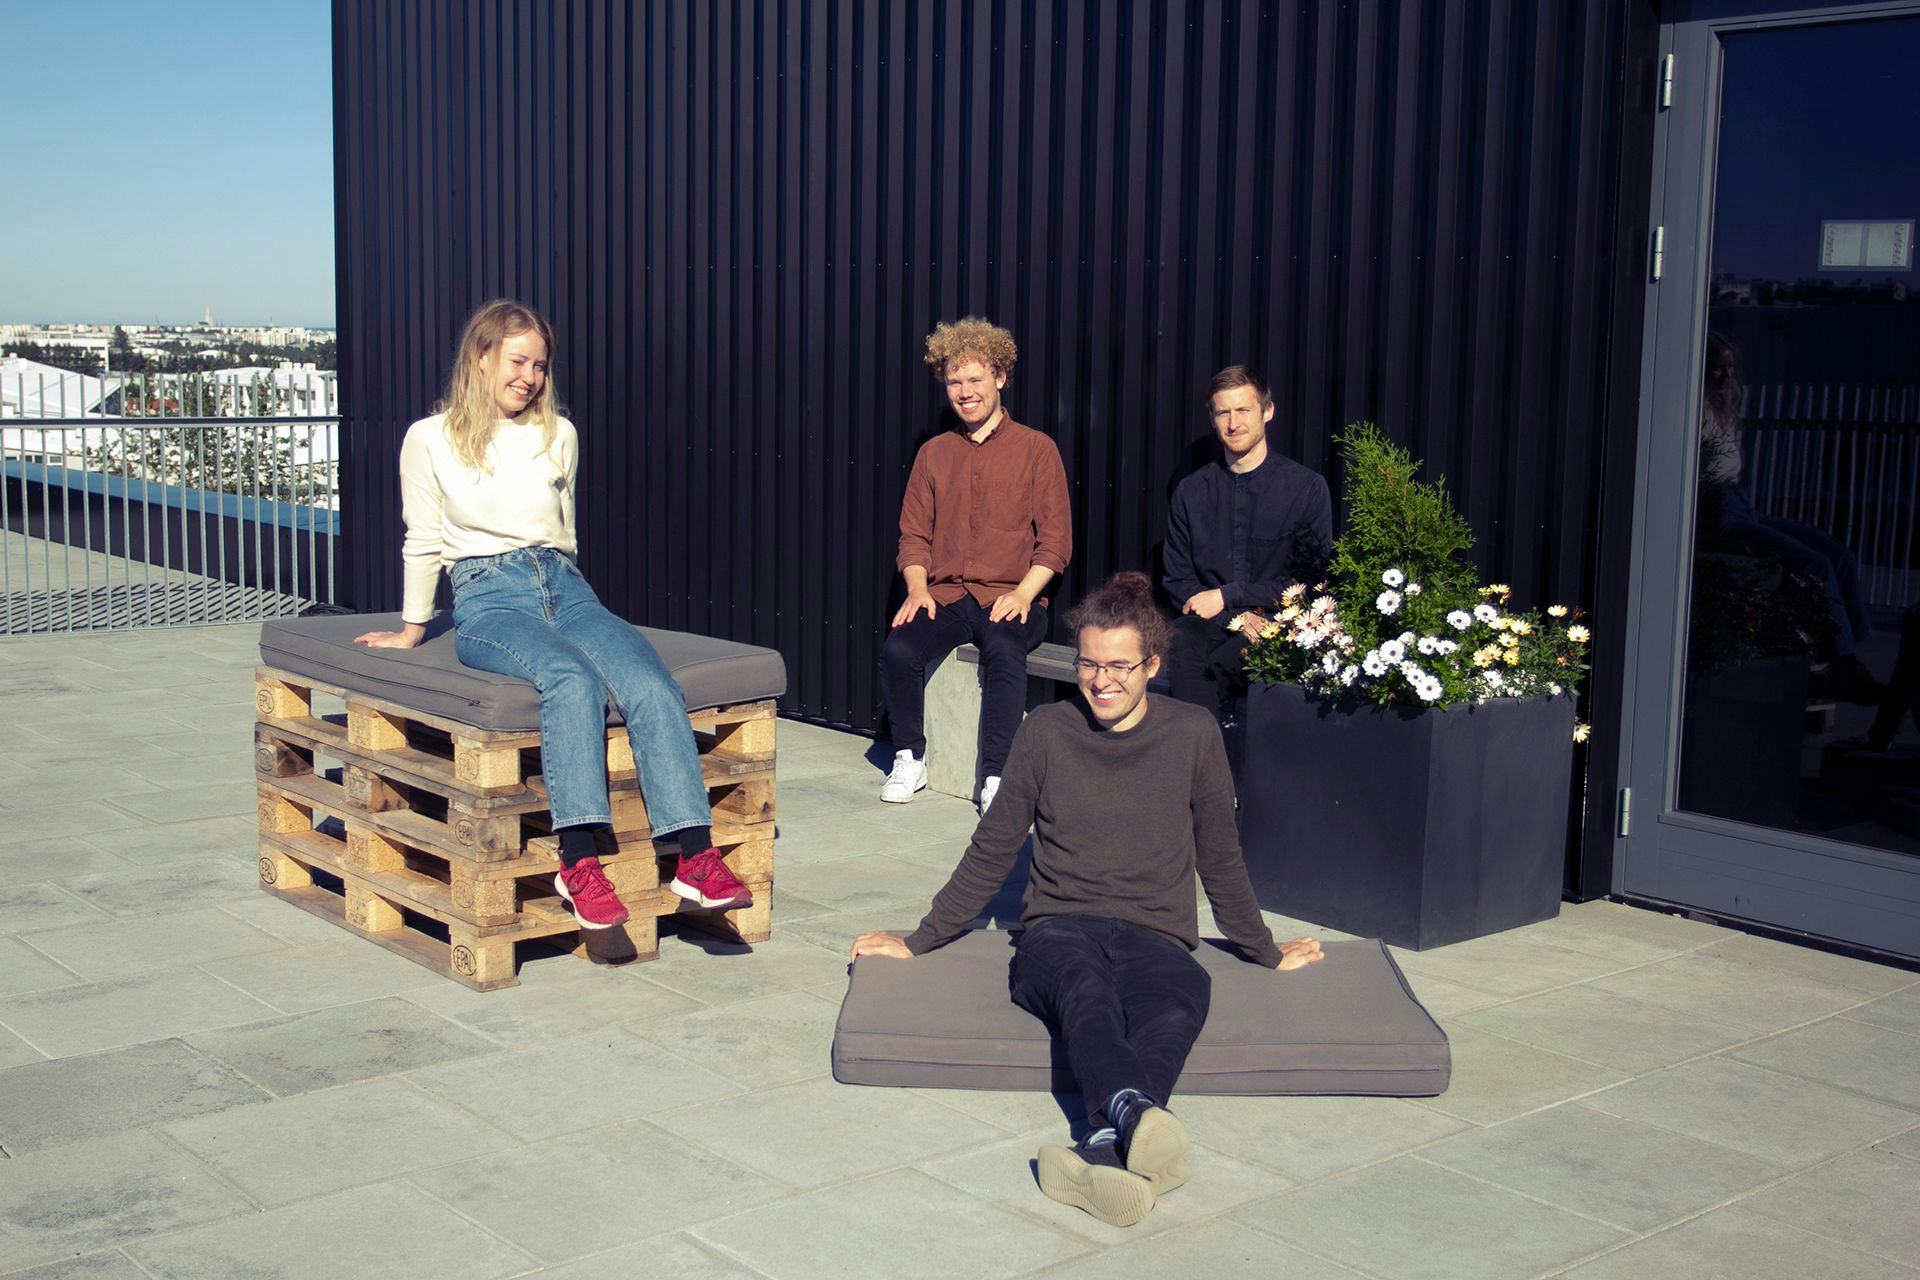 Four individuals relaxing on a sunny rooftop with seating made from pallets and cushions